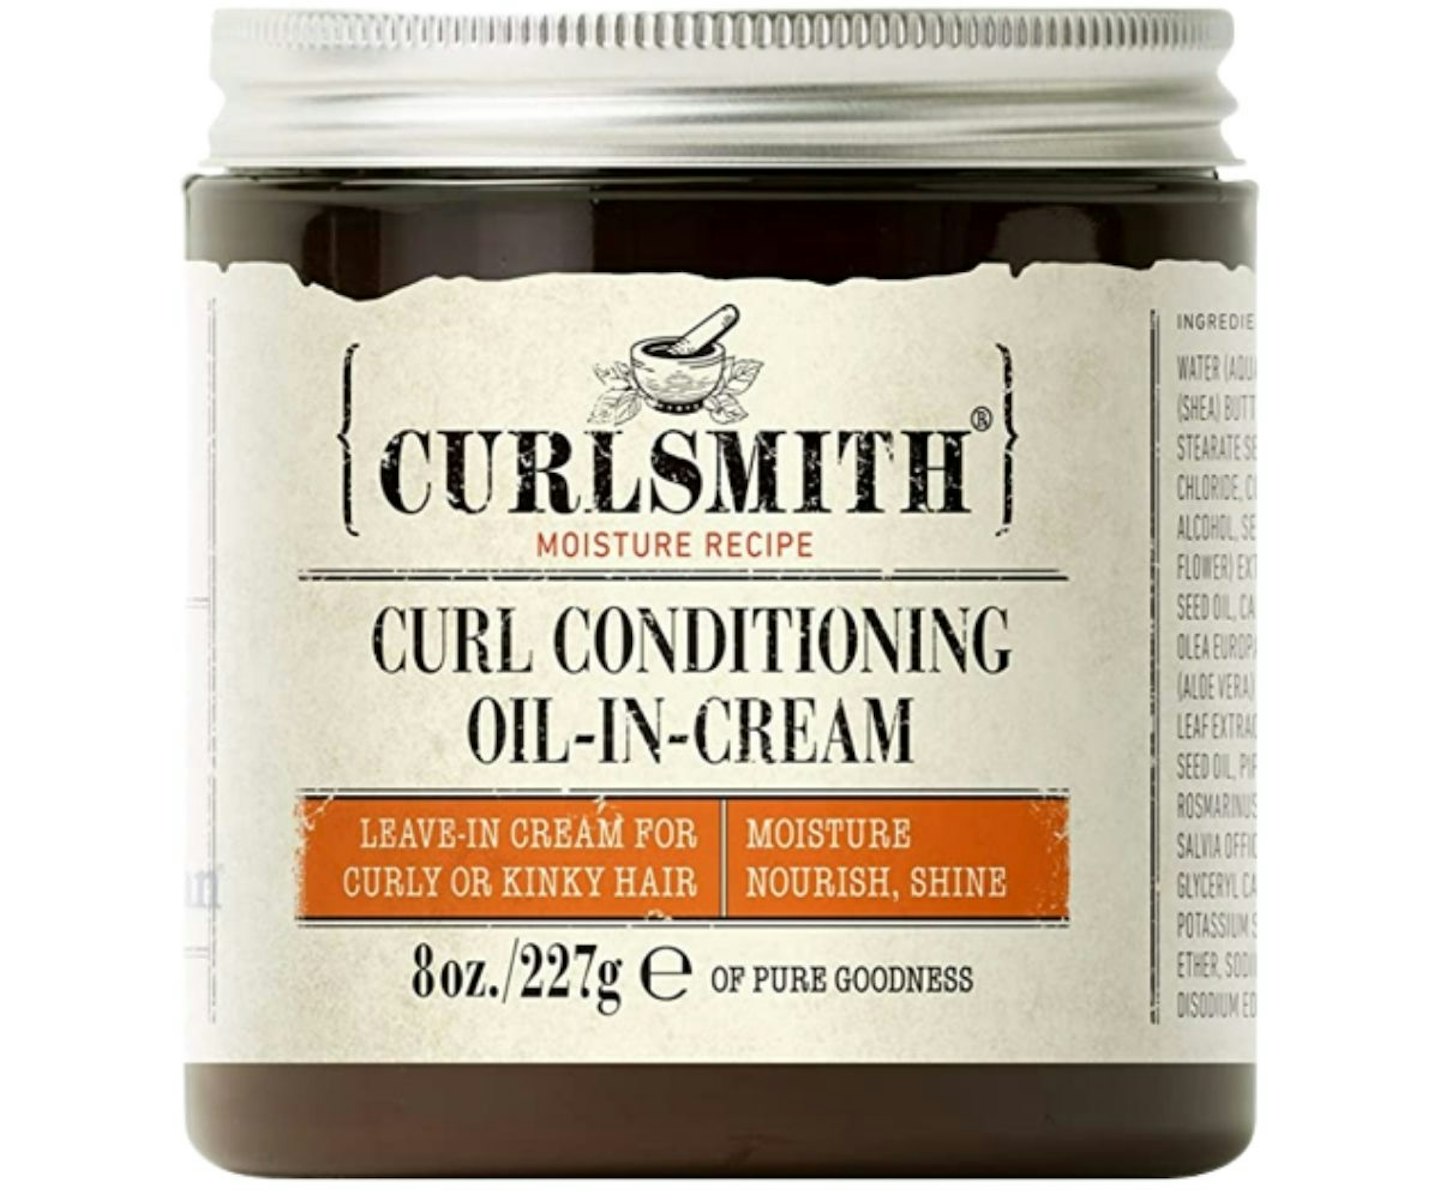 A picture of the Curlsmith Curl Conditioning Oil-In-Cream